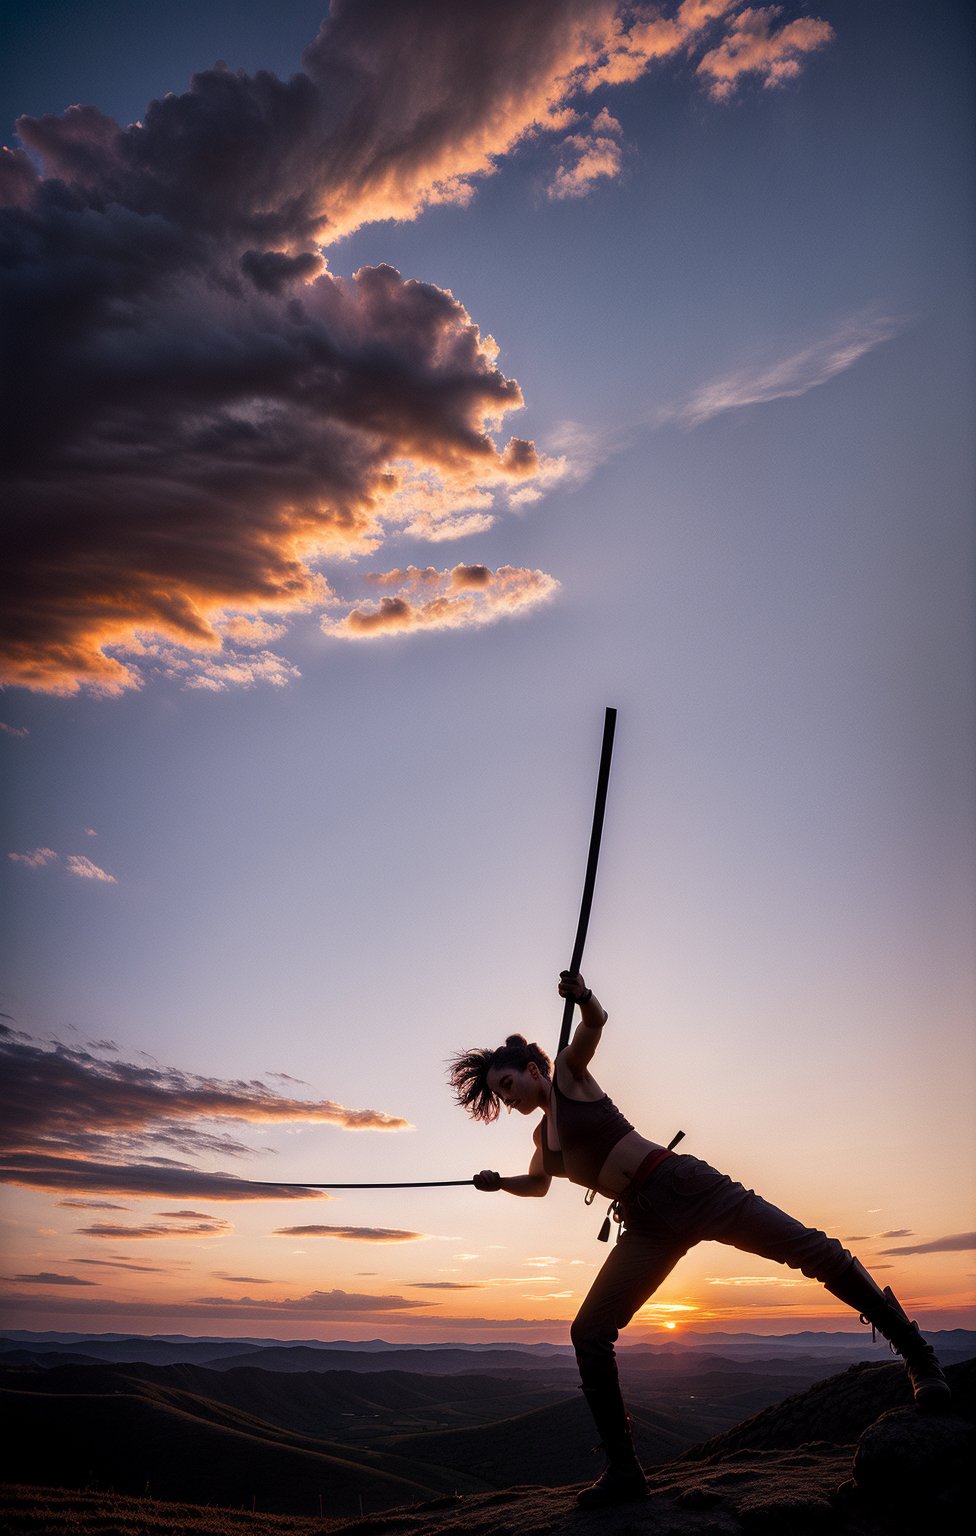 A portrait of the silhouette of a woman swinging a katana on top of a rugged hill. The silhouette is in a dynamic pose, with one leg forward and her body turned slightly to the side to emphasize the swing of the katana. Her posture conveys strength and agility, capturing the fluid motion of the action. The hilltop setting is rugged, with rocky outcrops and sparse vegetation. The sky is a canvas of vibrant colors, blending shades of orange, red, and purple as the sun sets, creating a breathtaking backdrop for the silhouette, enhancing the intensity and drama of the scene.